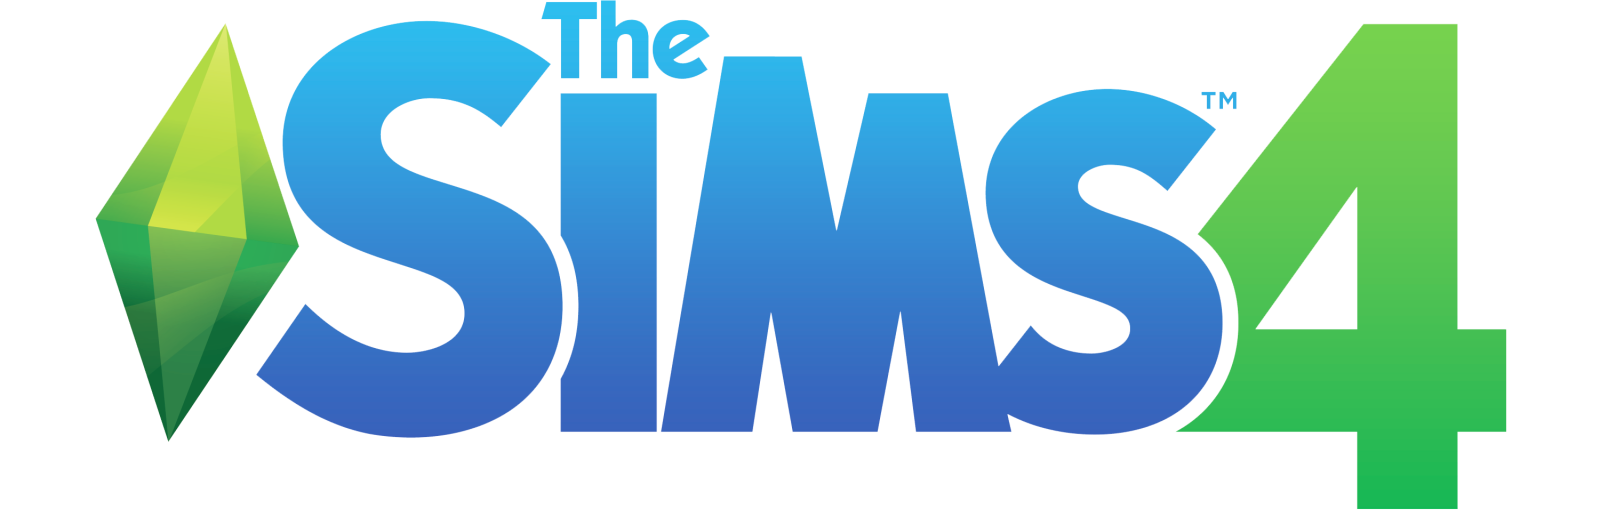 the sims 4 cats and dogs free download for mac